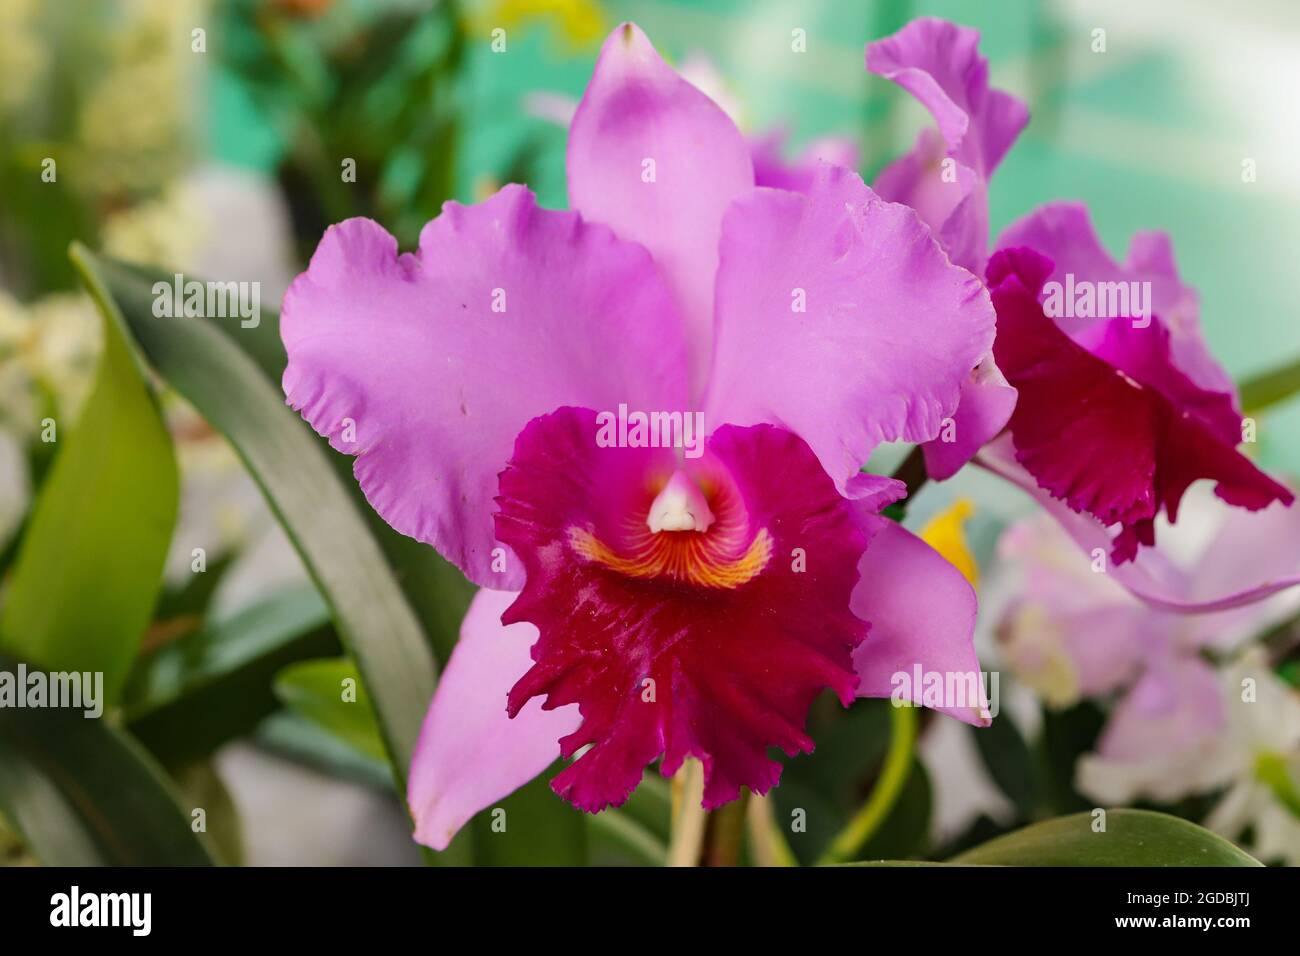 Crimson Cattleya orchid flower with center focus and rest of image blurred Stock Photo